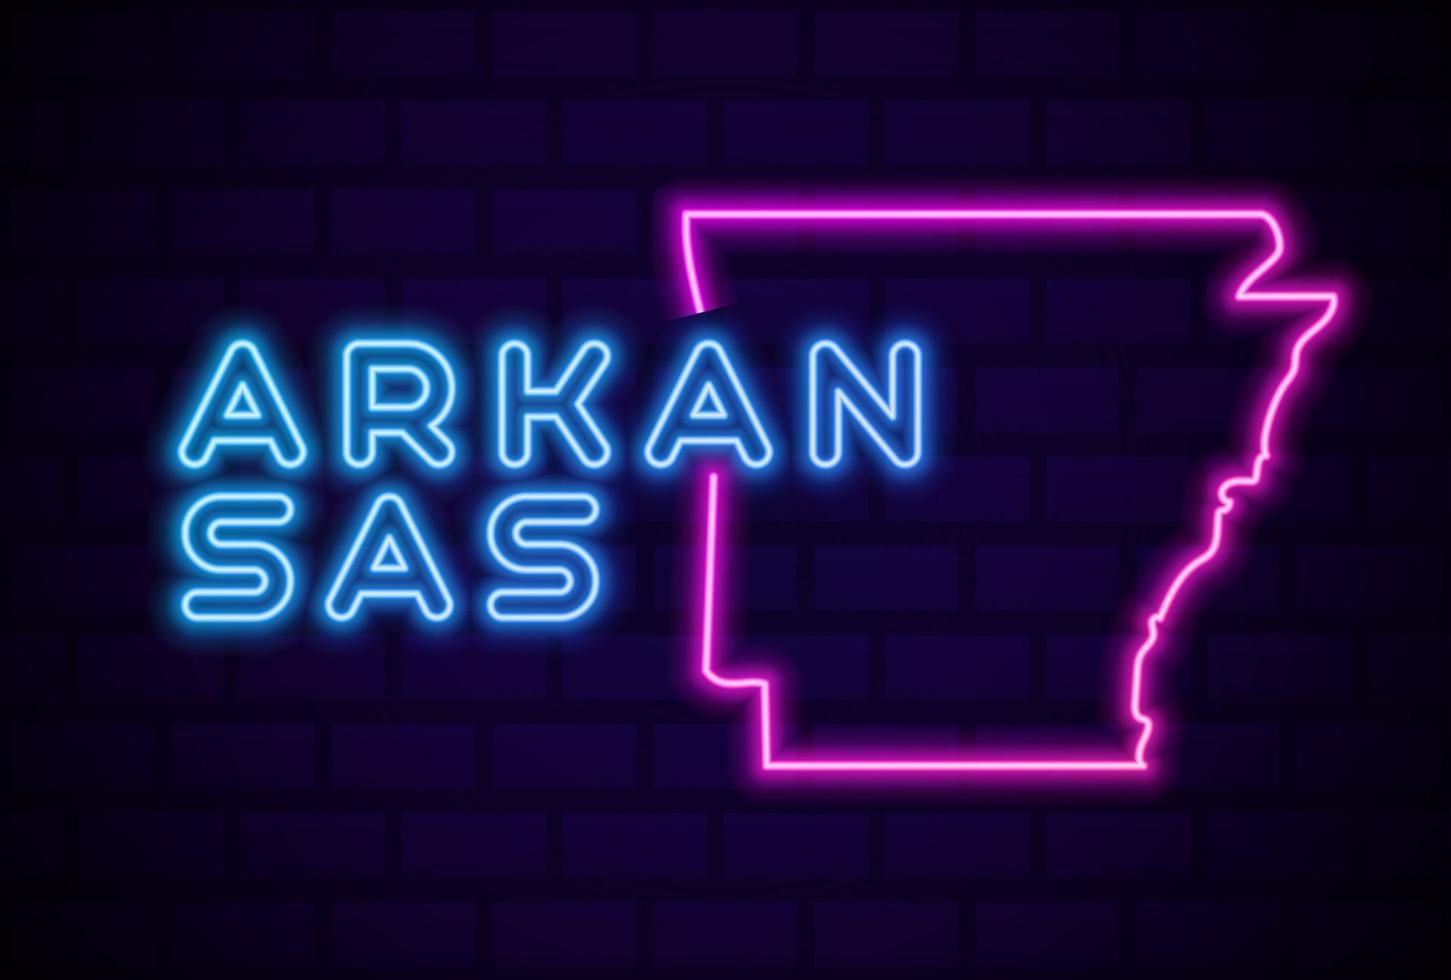 arkansas US state glowing neon lamp sign Realistic vector illustration Blue brick wall glow